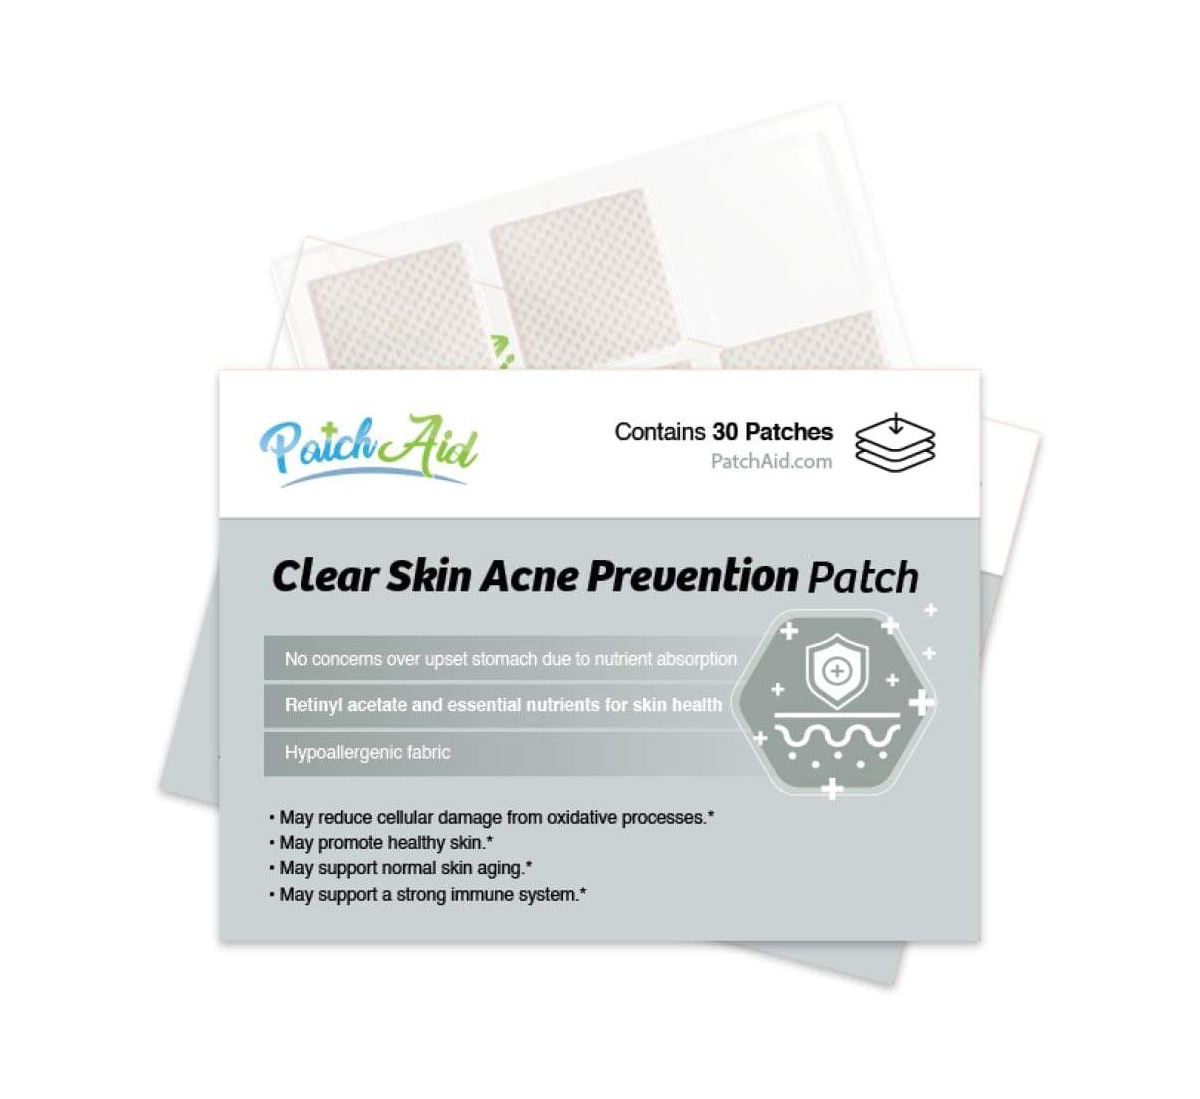 Clear Skin Acne Prevention Patch by PatchAid (30-Day Supply) - White